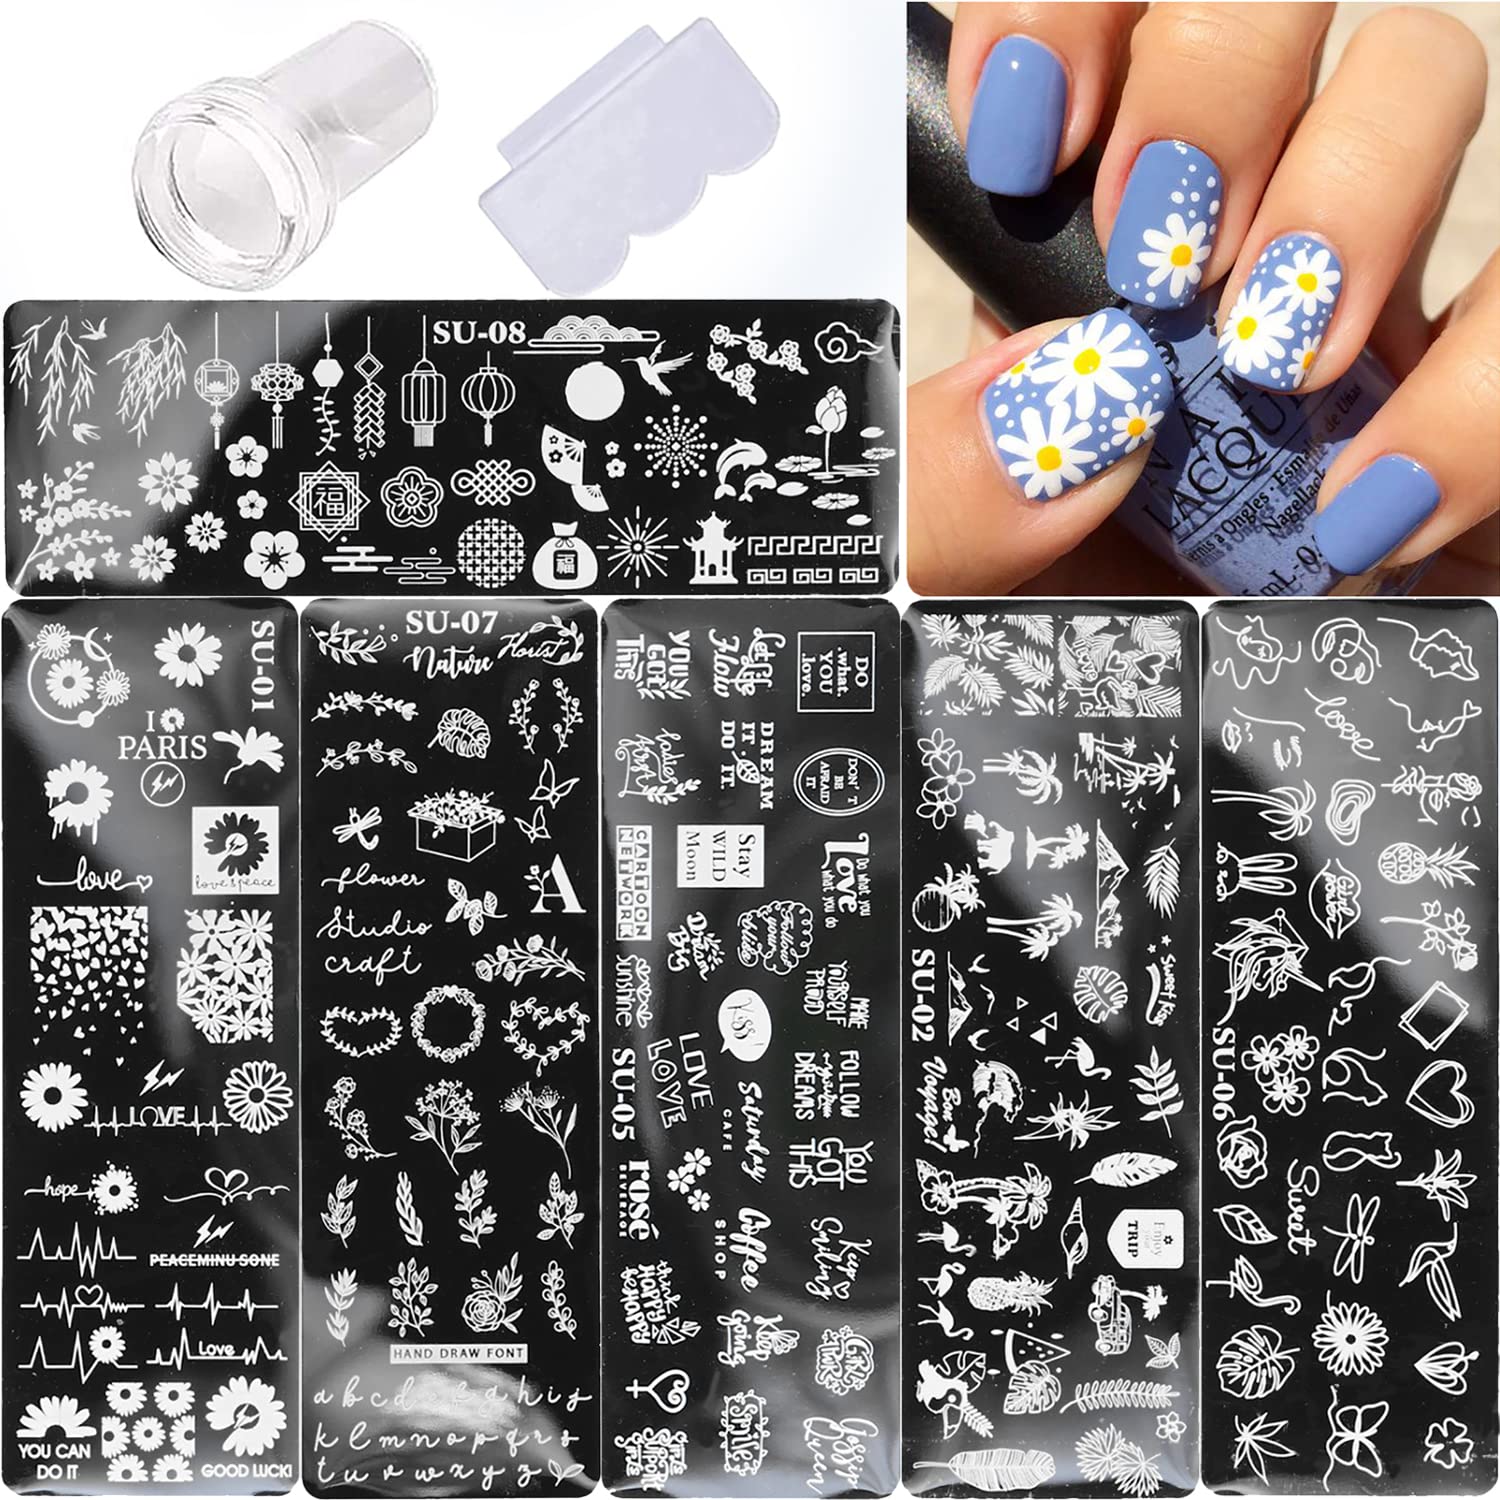 Whats Up Nails - B031 Gothic Affection Stamping Plate for Halloween Nail  Art Design